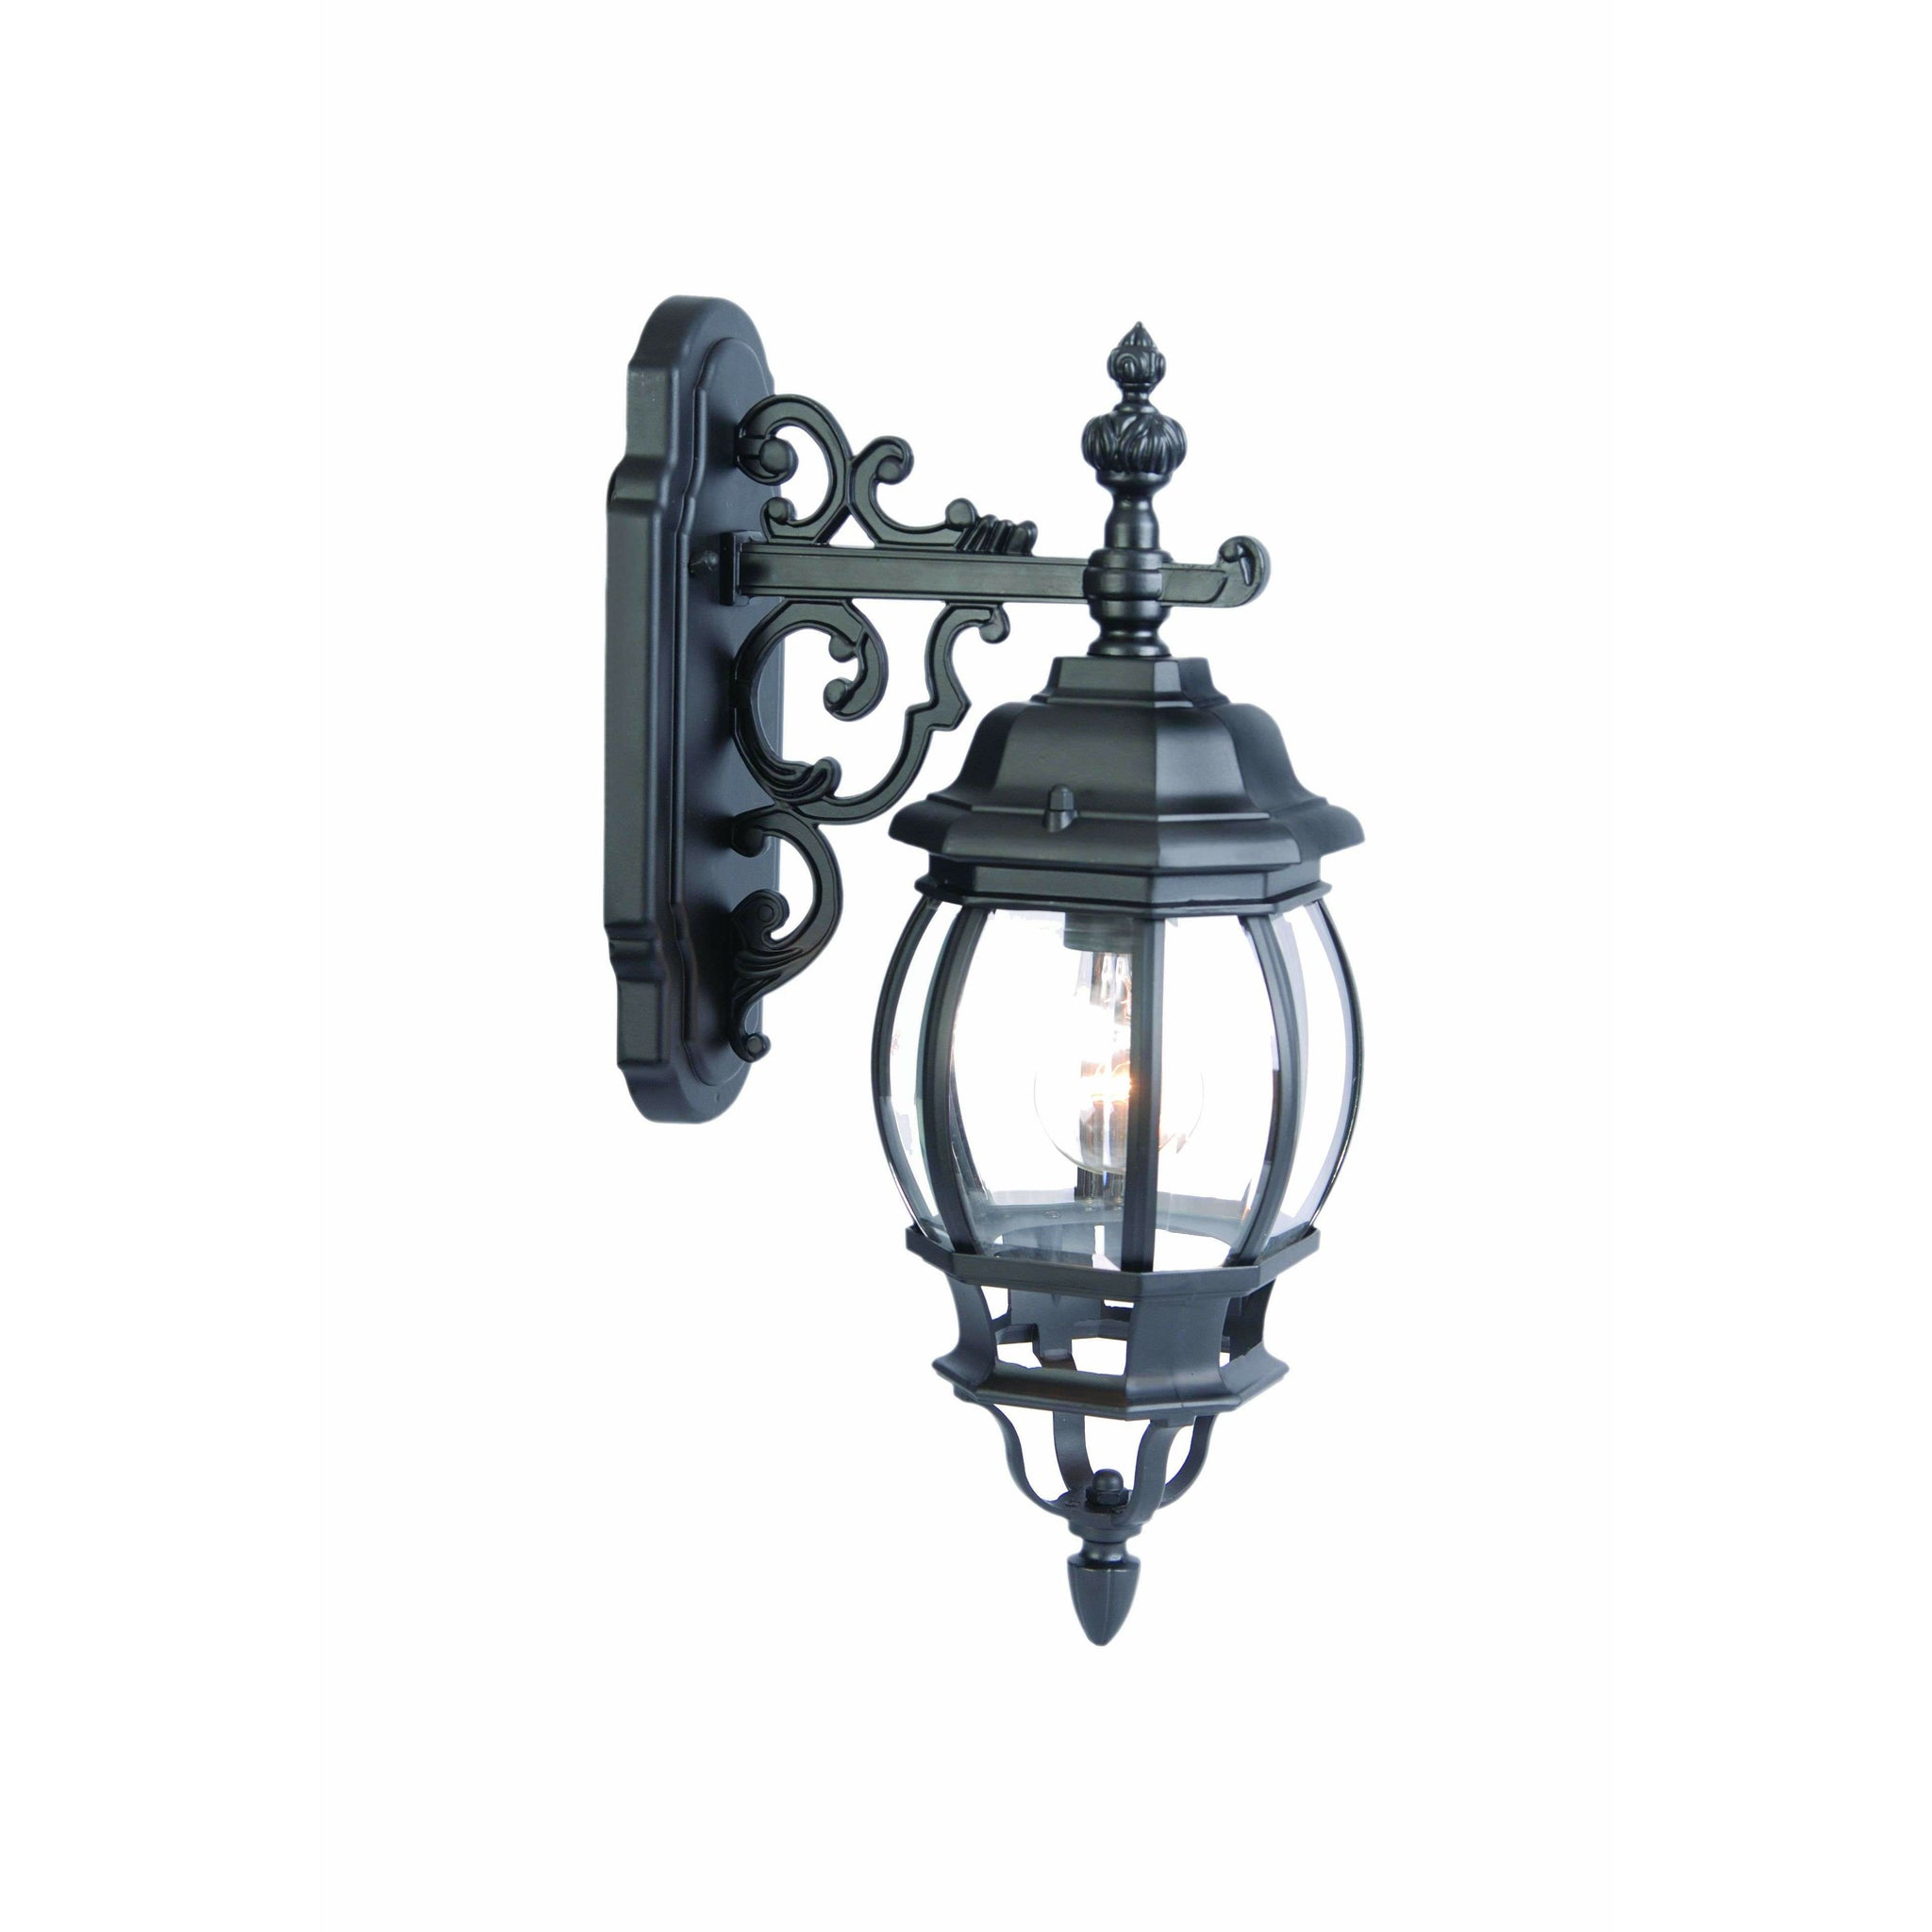 Chateau Outdoor Wall Light